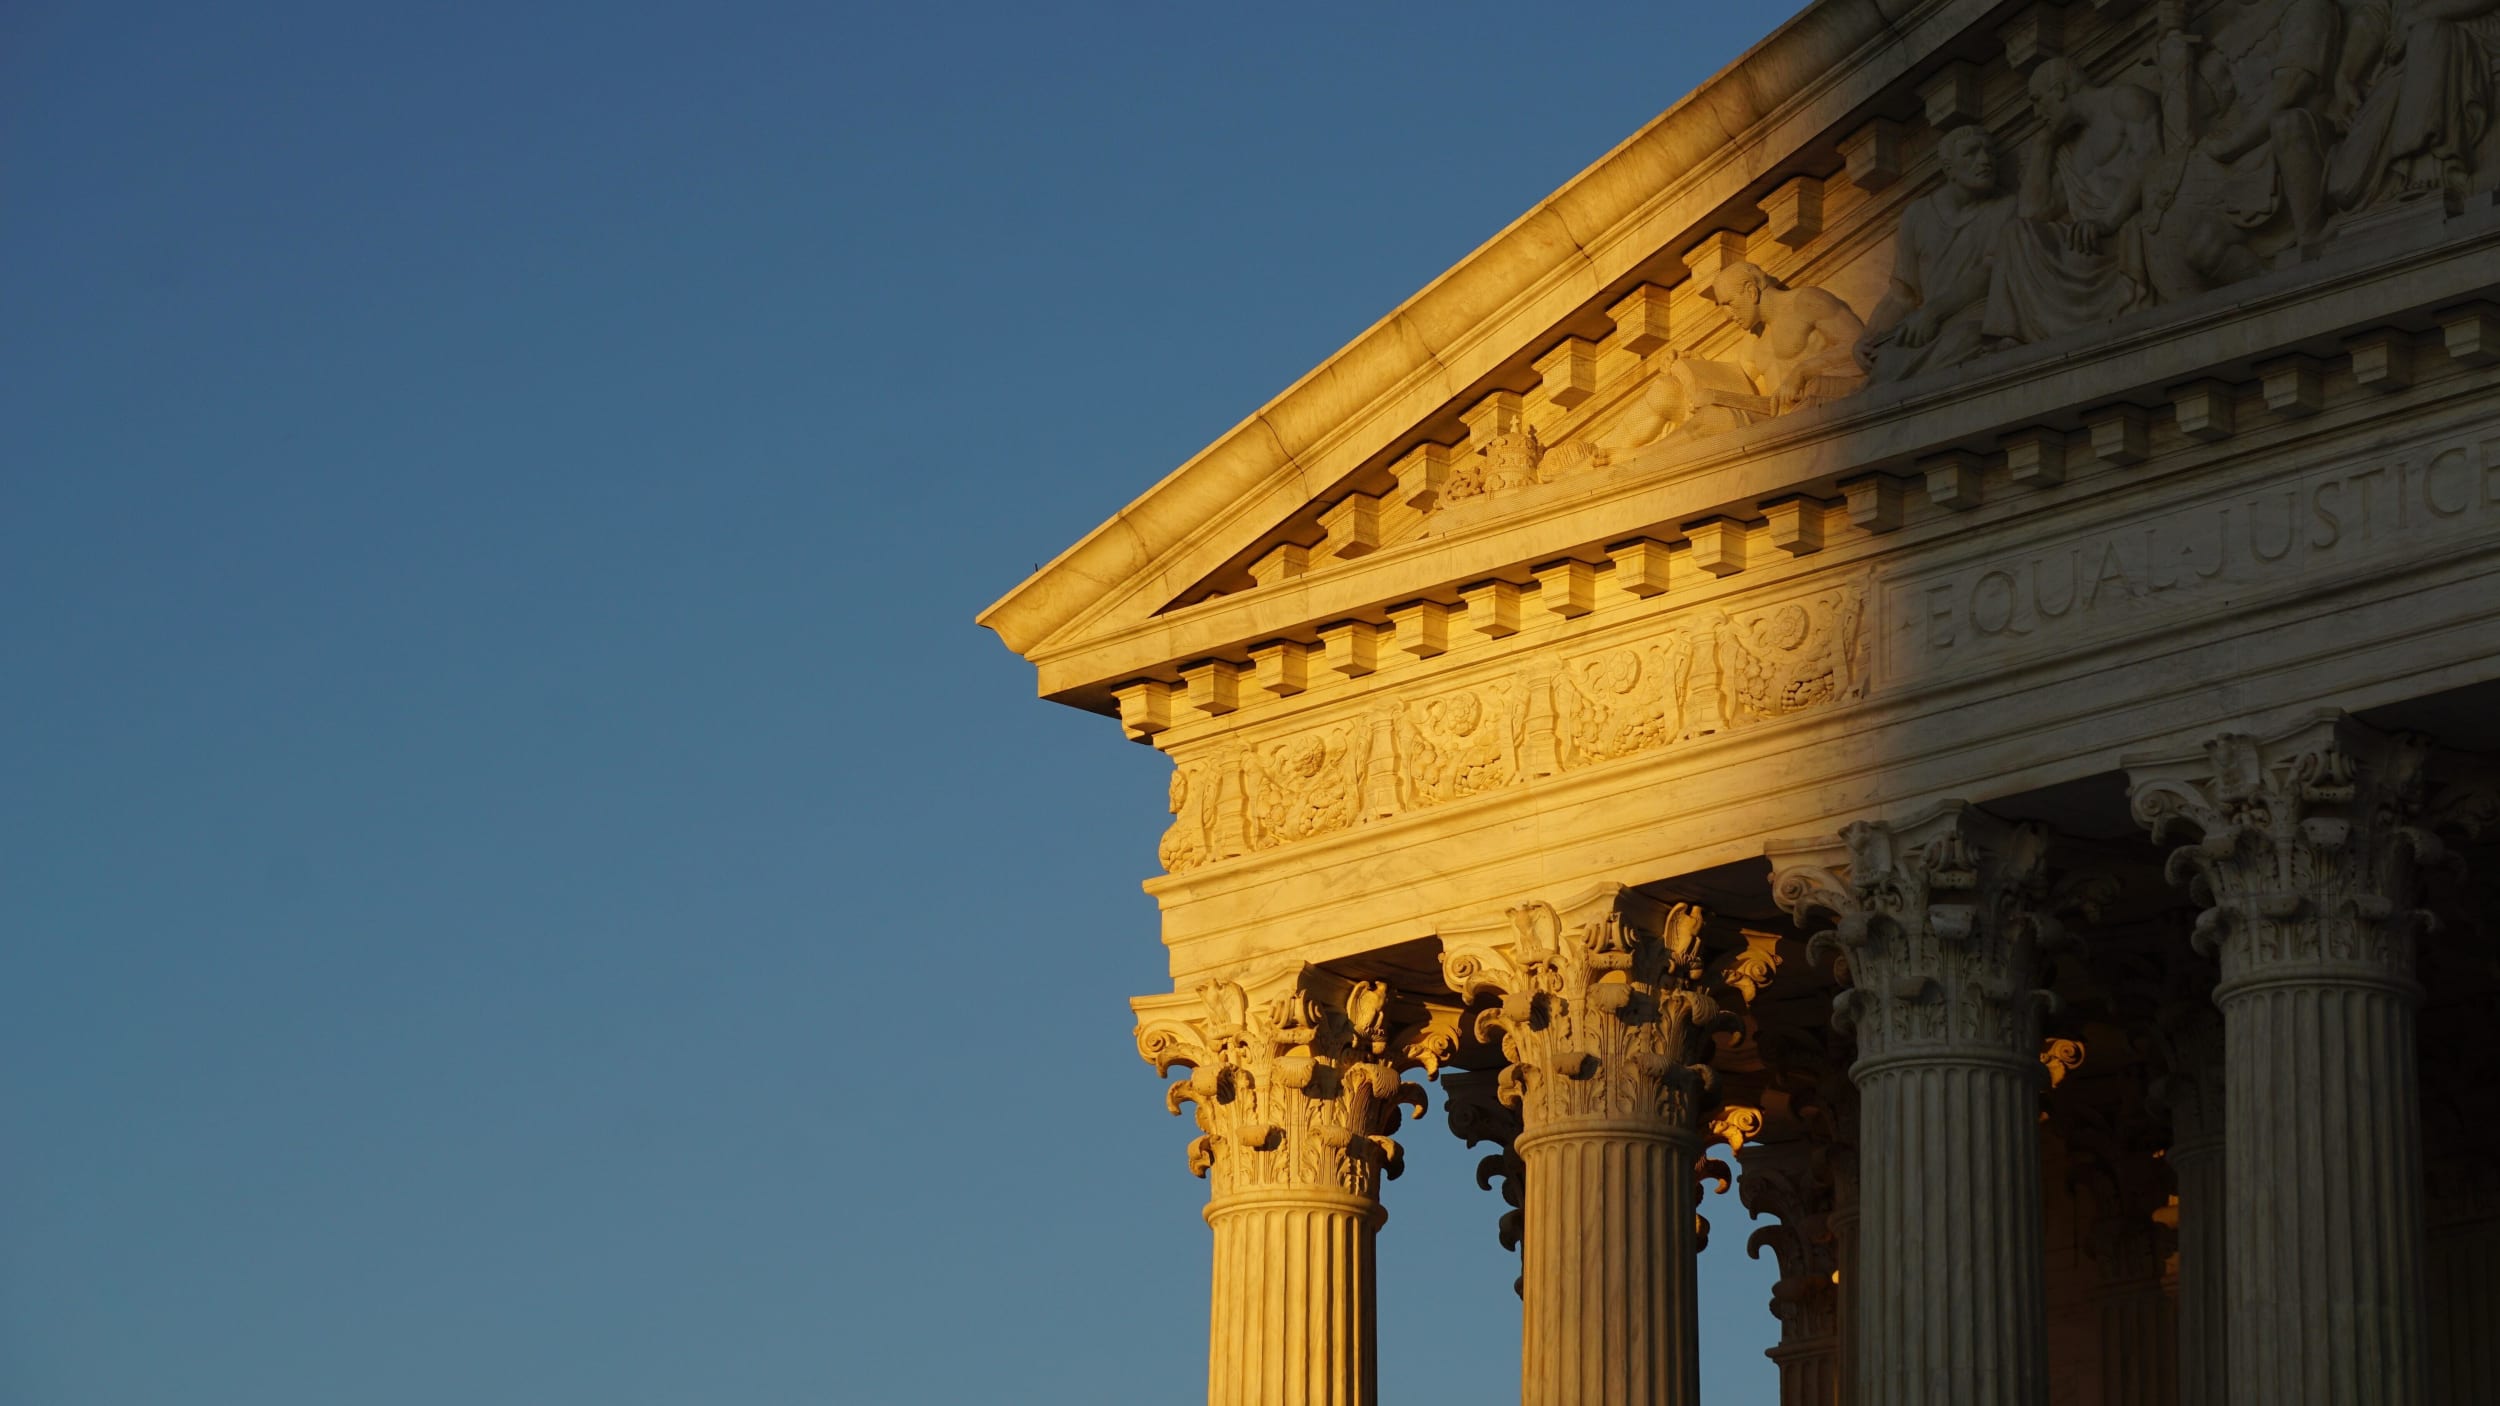 Photo of the top of the U.S. Supreme Court building Washington D.C., half covered in shadow and half in golden light with a blue sky background.